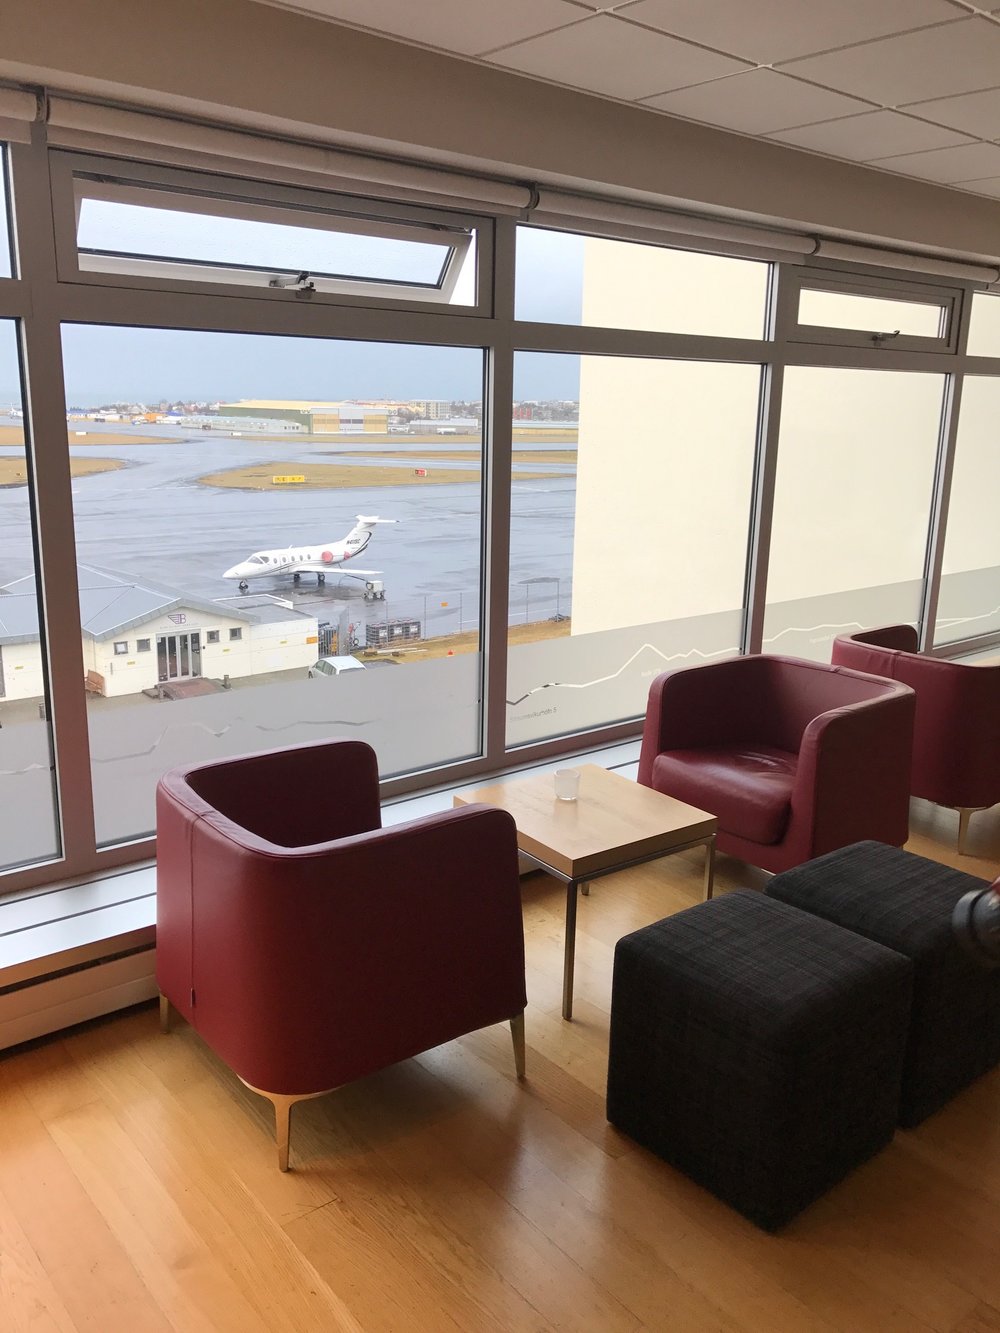 Pictured: 4th floor Lounge with a view of Icelandic Air private jet airport where celebrities such as Kim Kardashian and Justin Bieber have landed.